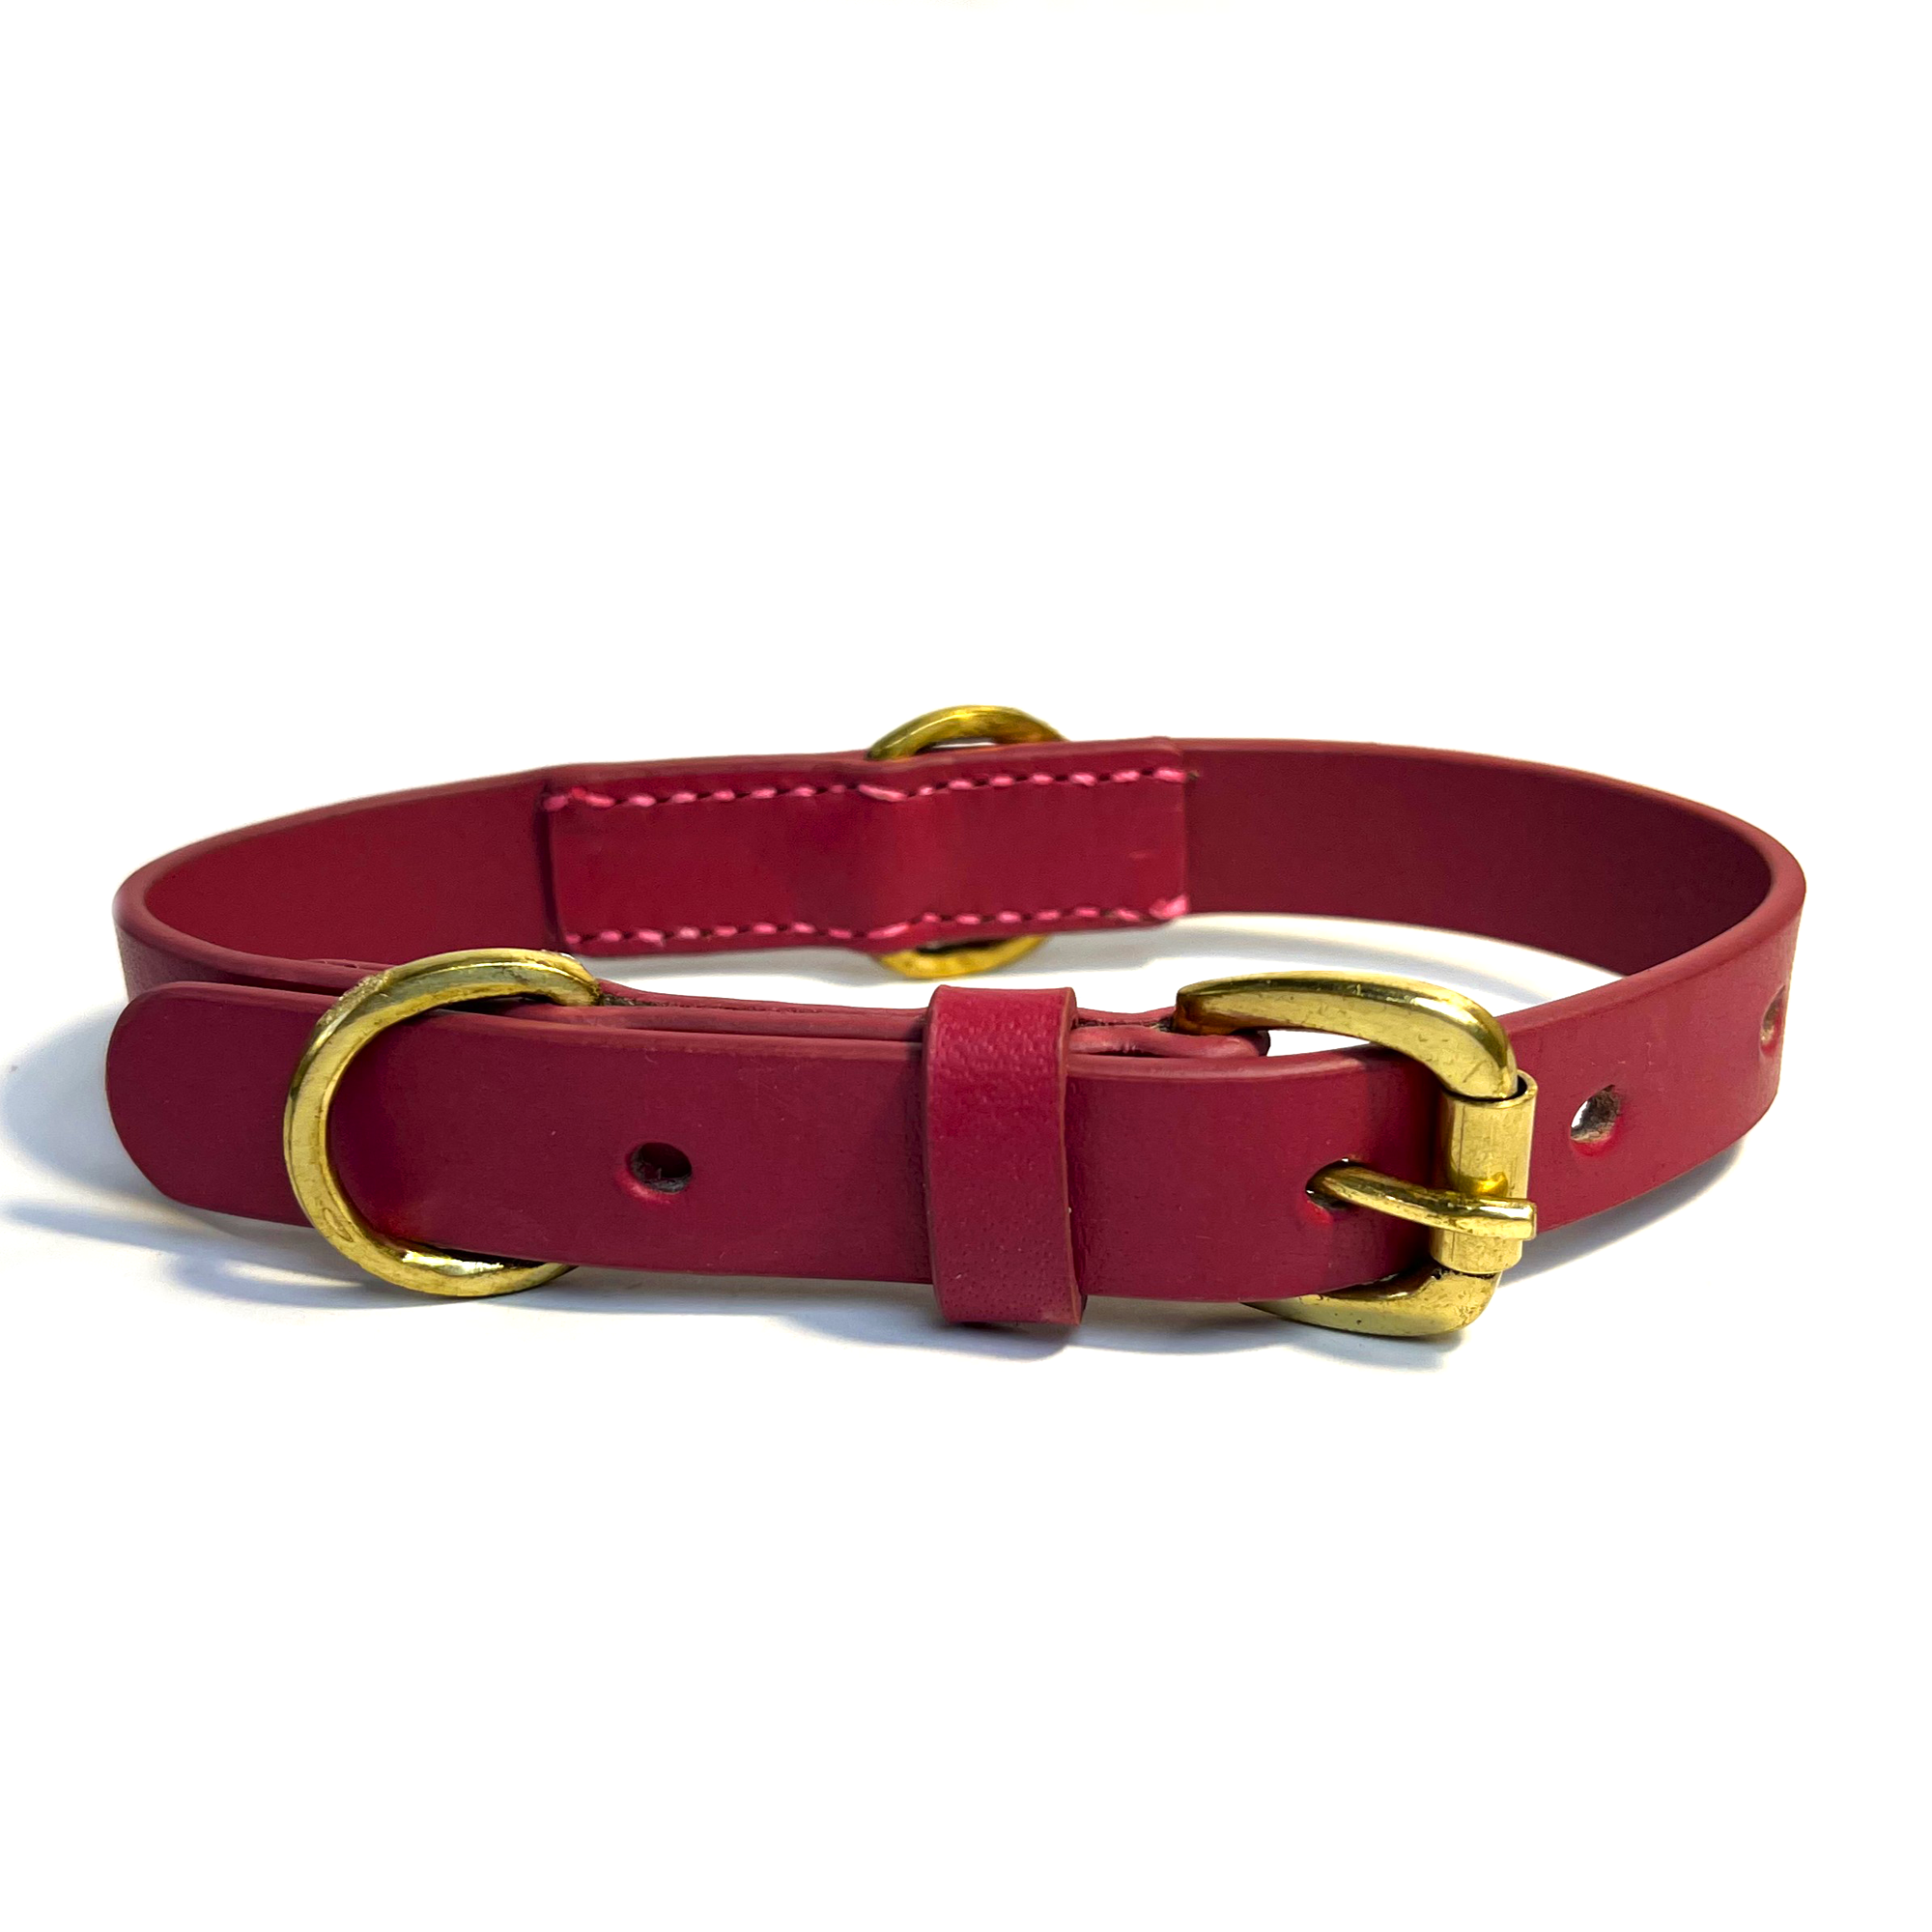 A hand-made Georgie Paws Bald Collar Ruby with gold-tone hardware, featuring a buckle closure and d-ring attachment point, isolated against a white background.